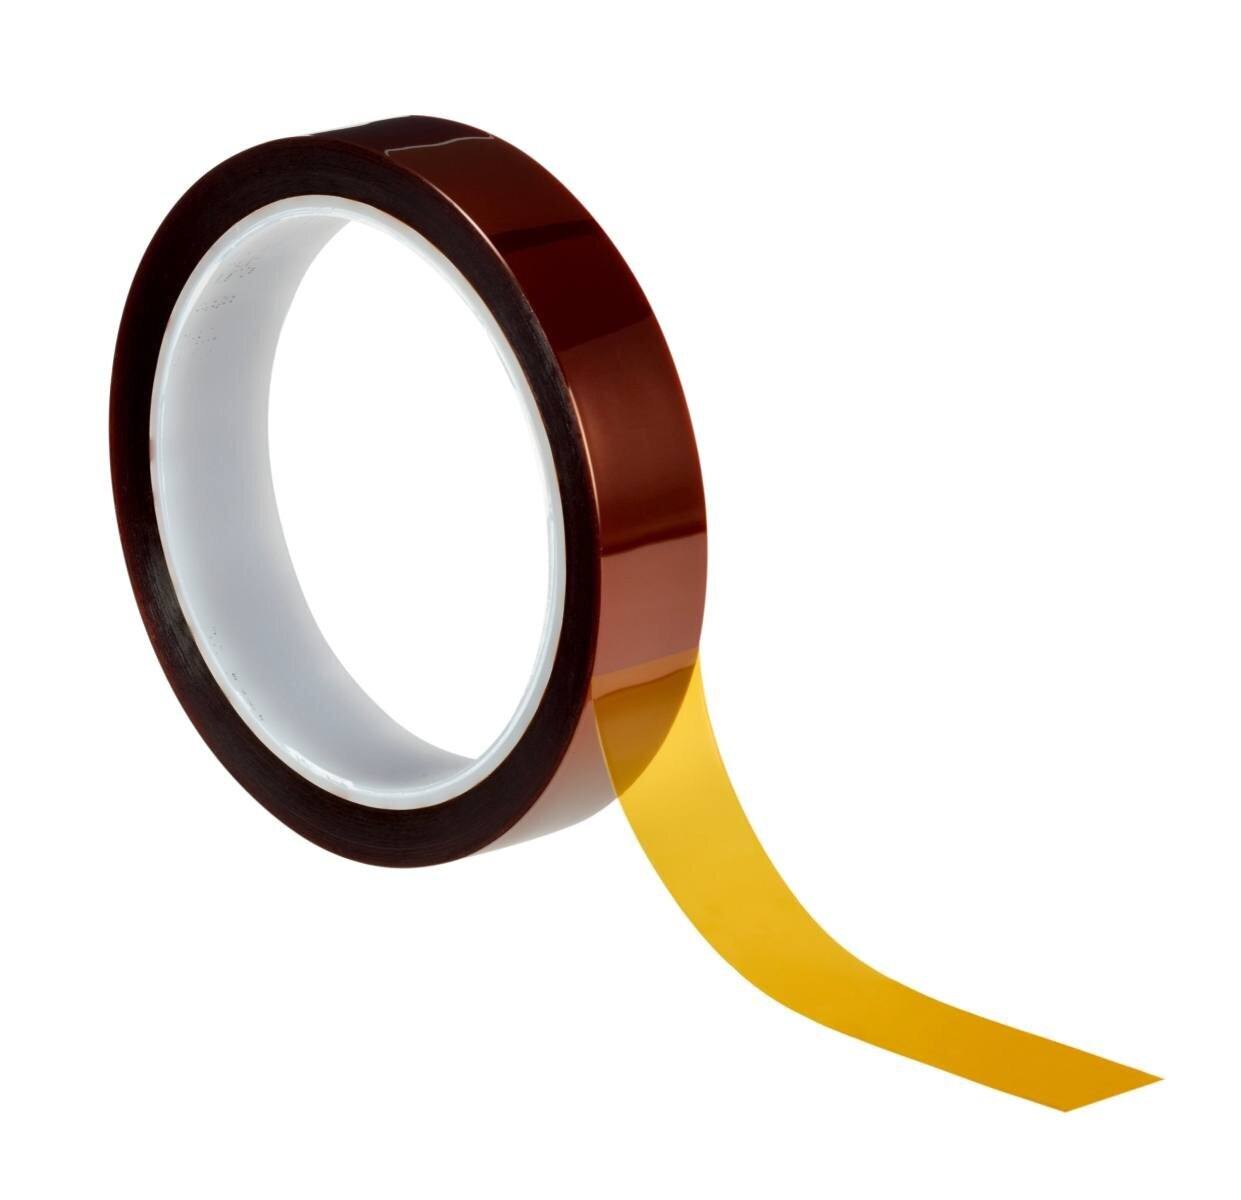 3M high temperature polyimide adhesive tape 5413, brown, 25.4 mm x 33 m, 68.58 µm